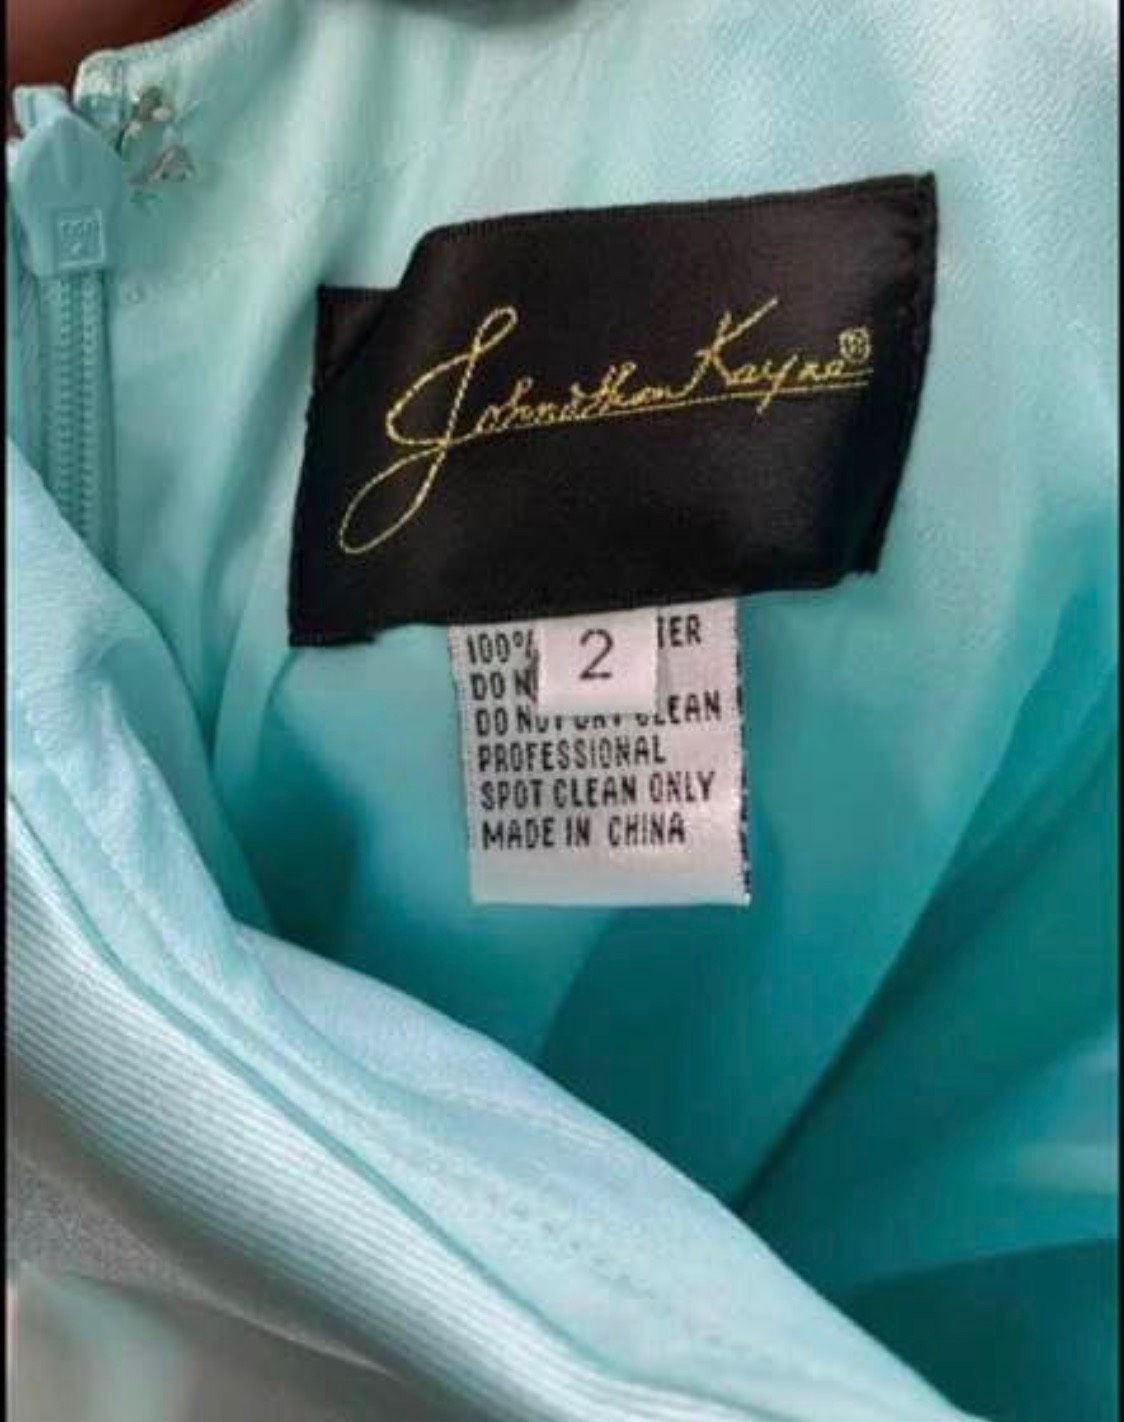 Johnathan Kayne Size 2 Prom Halter Blue A-line Dress on Queenly